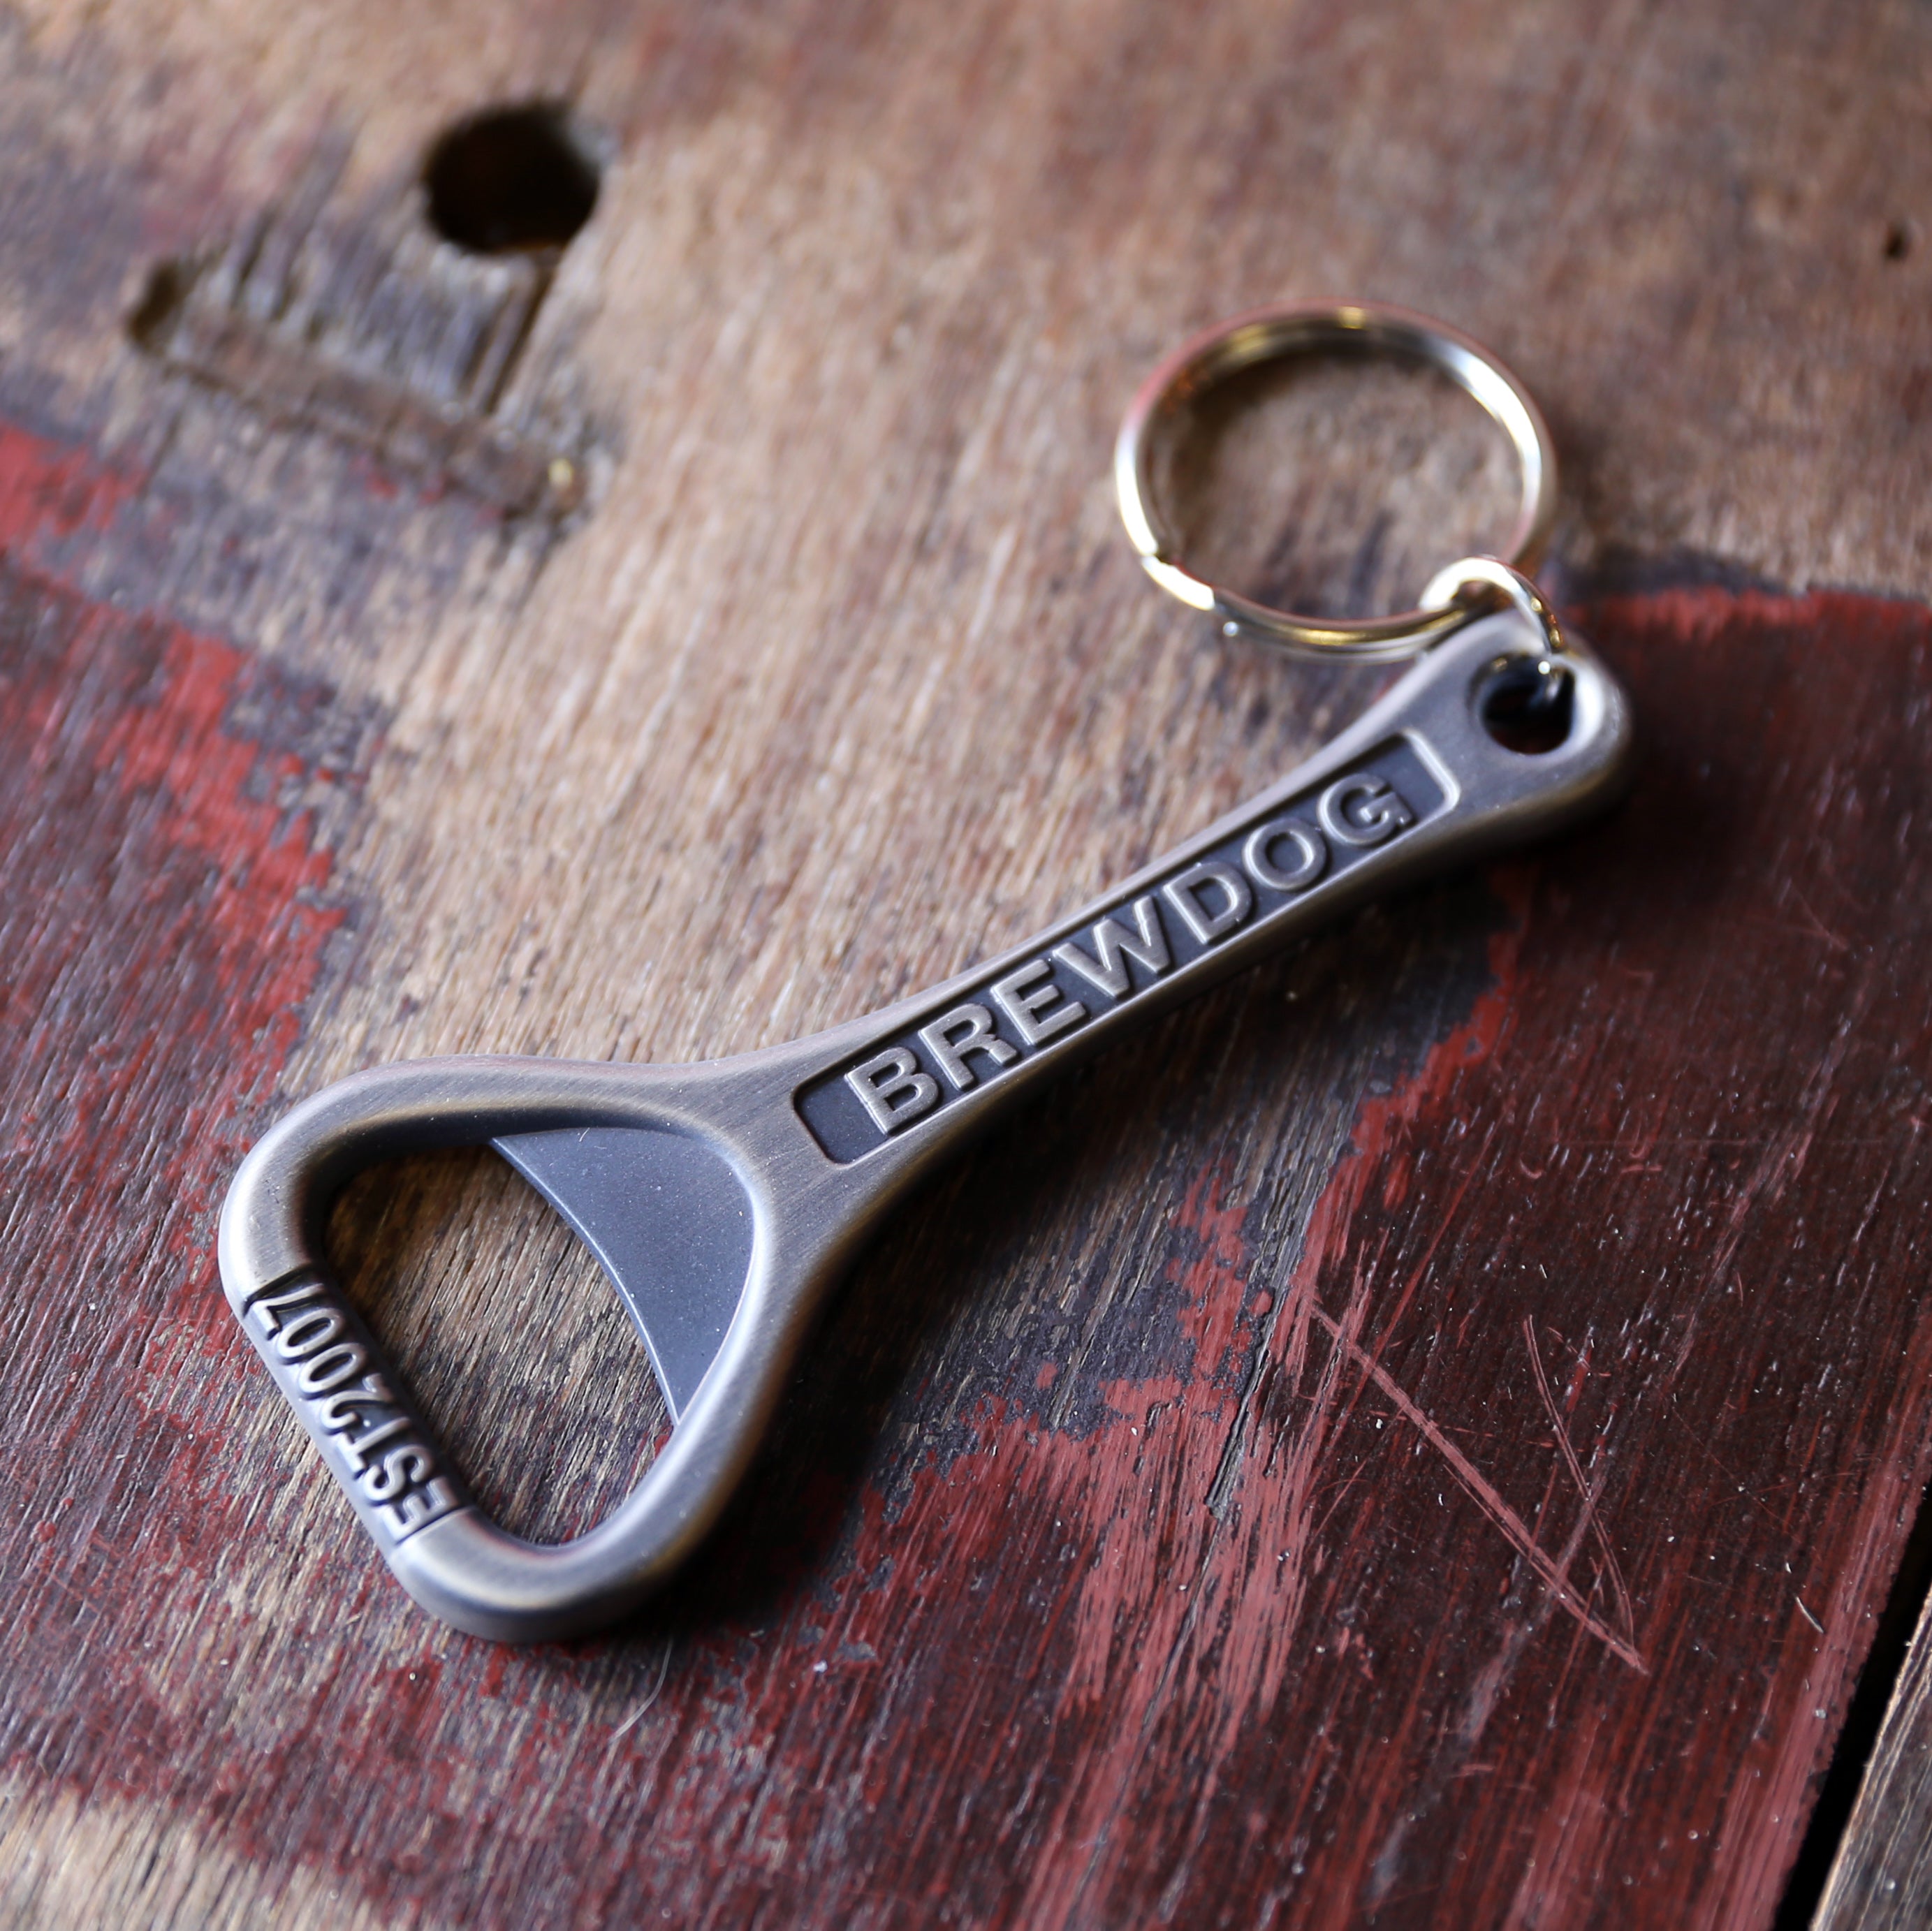 where can i buy a bottle opener